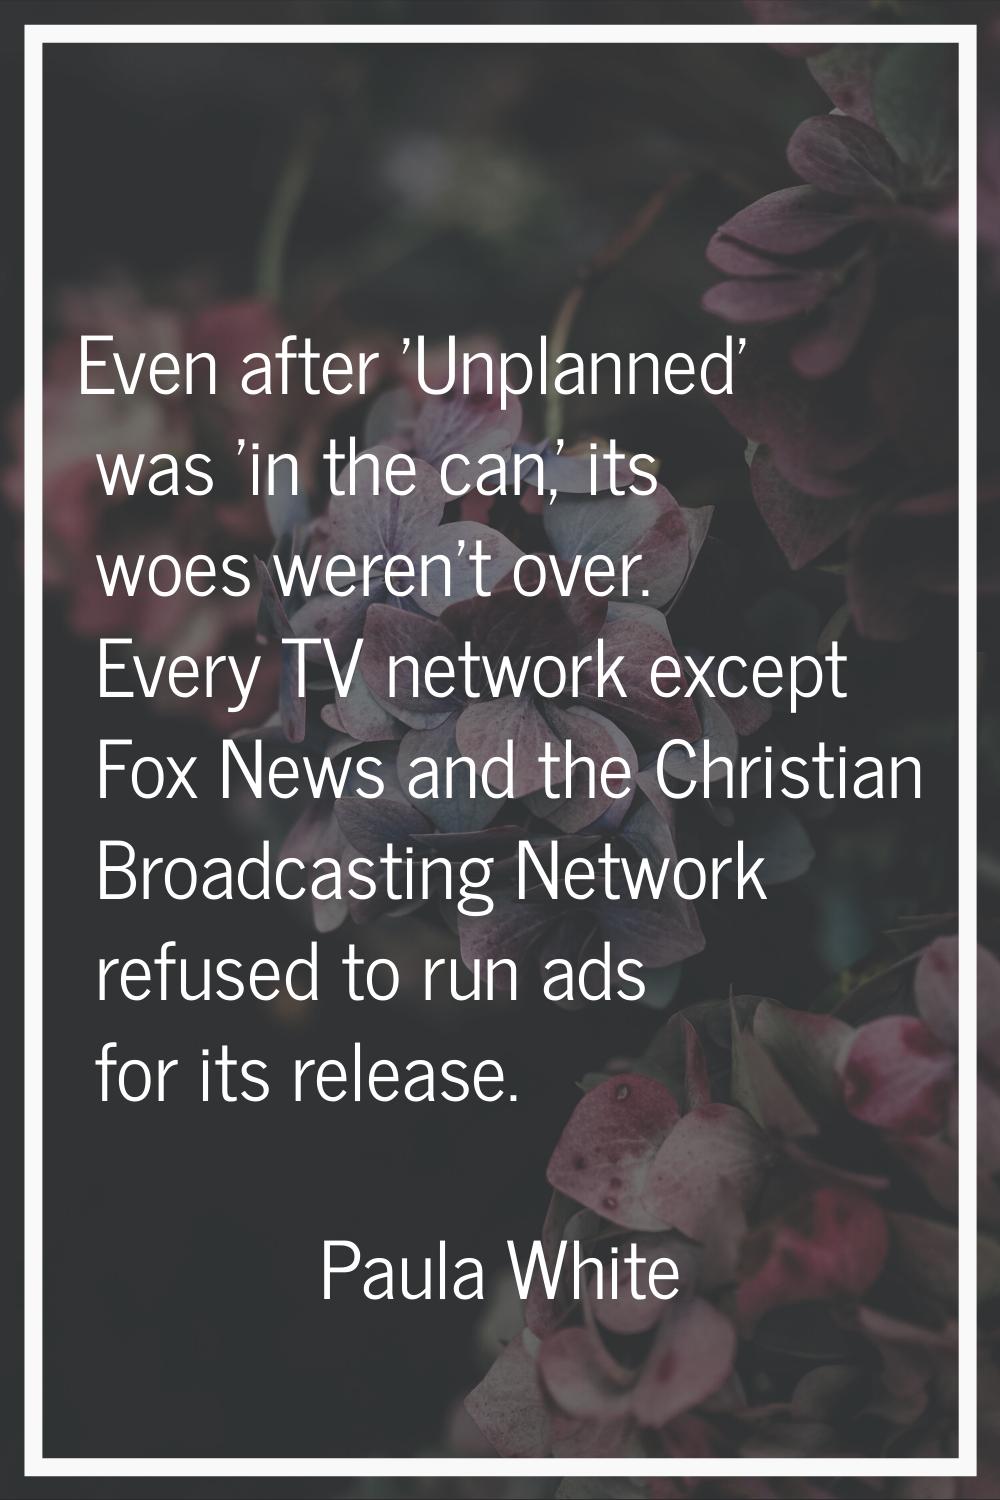 Even after 'Unplanned' was 'in the can,' its woes weren't over. Every TV network except Fox News an